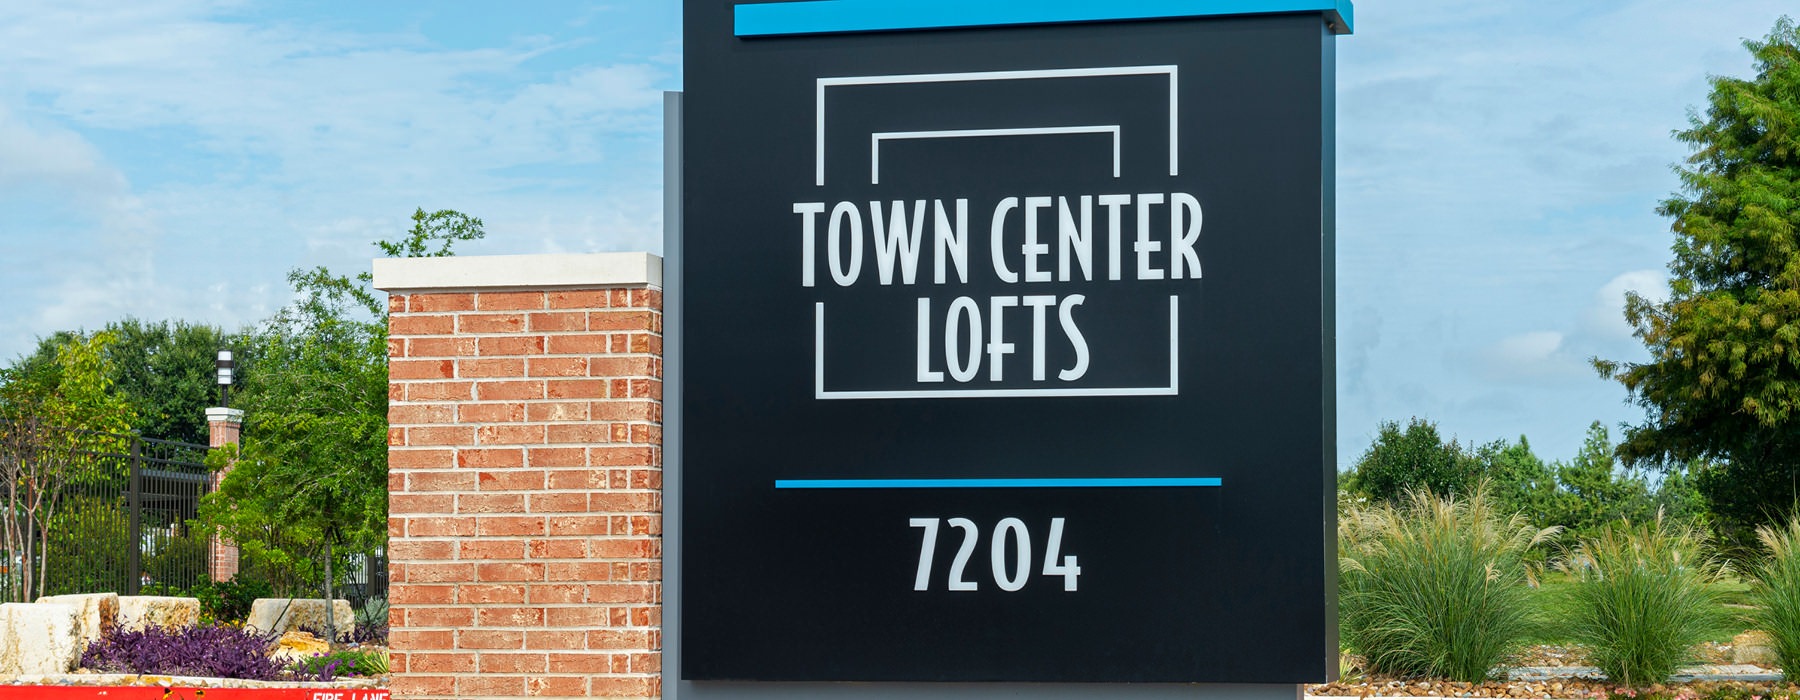 Town Center Lofts sign on property